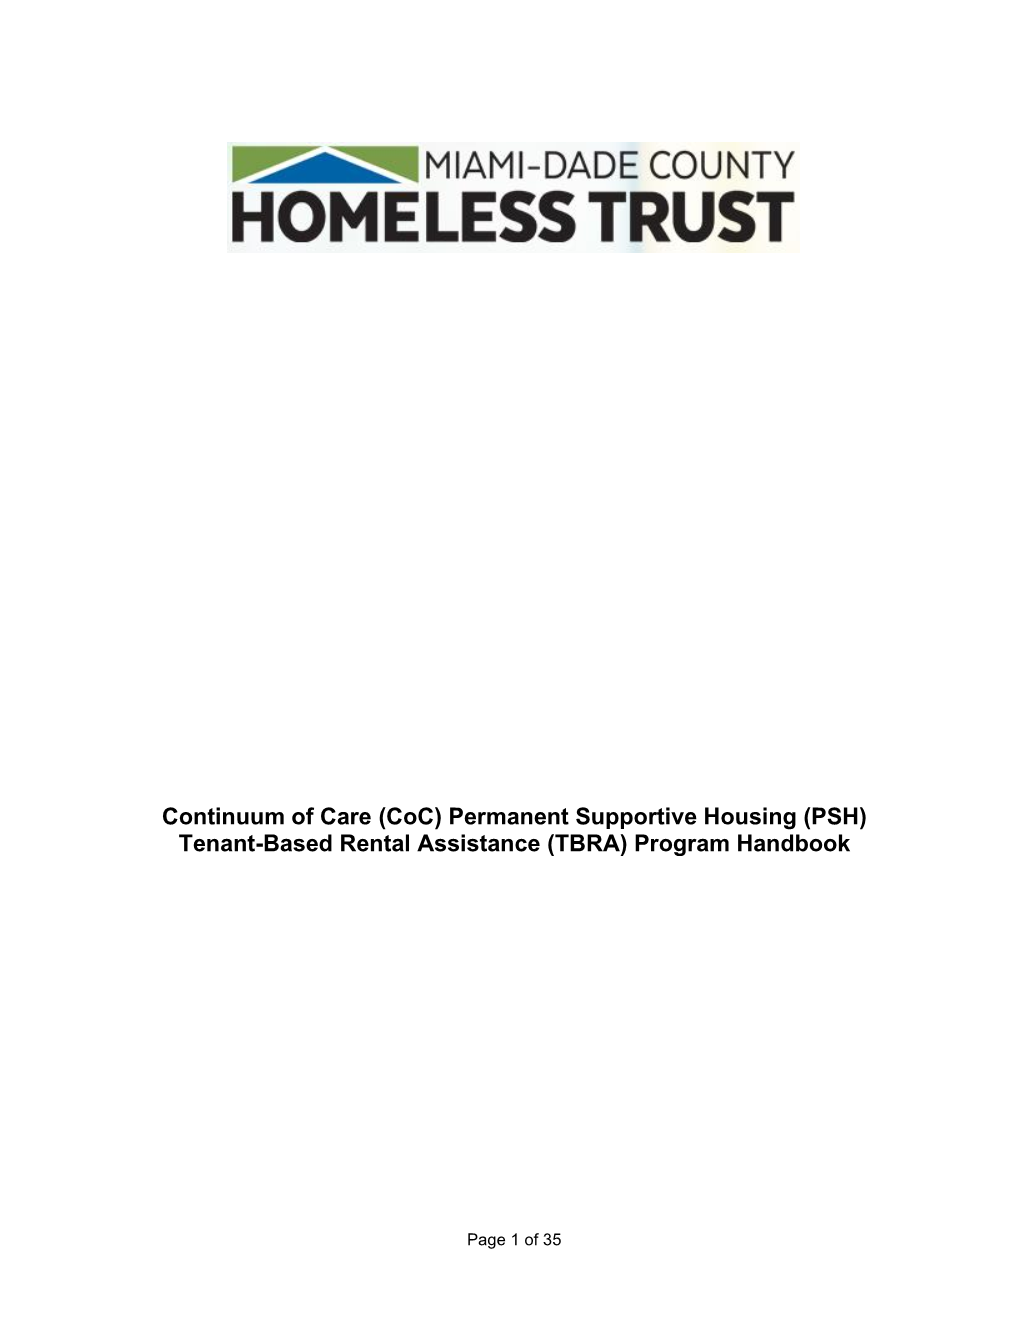 Continuum of Care (Coc) Permanent Supportive Housing (PSH) Tenant-Based Rental Assistance (TBRA) Program Handbook